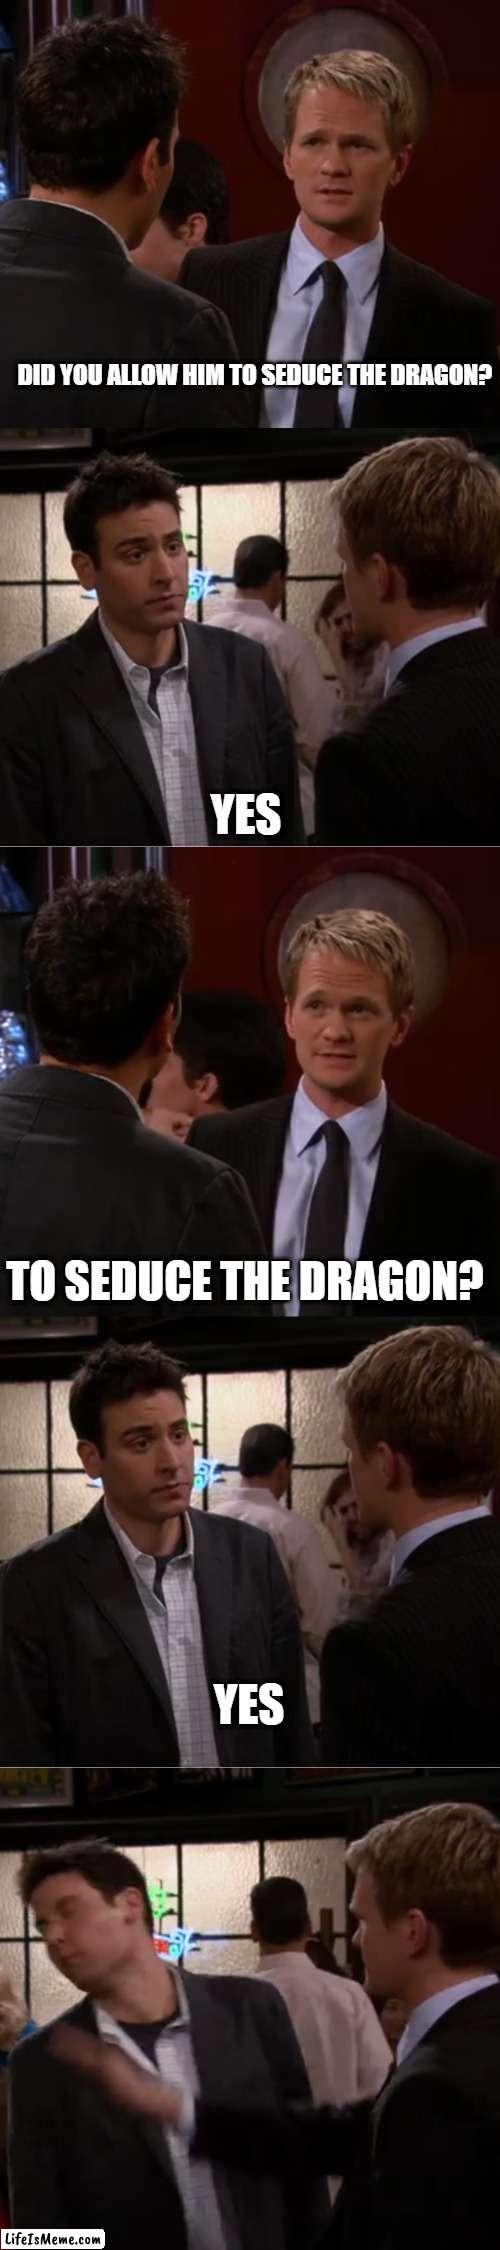 Raindance | DID YOU ALLOW HIM TO SEDUCE THE DRAGON? YES; TO SEDUCE THE DRAGON? YES | image tagged in raindance,dungeons and dragons | made w/ Lifeismeme meme maker